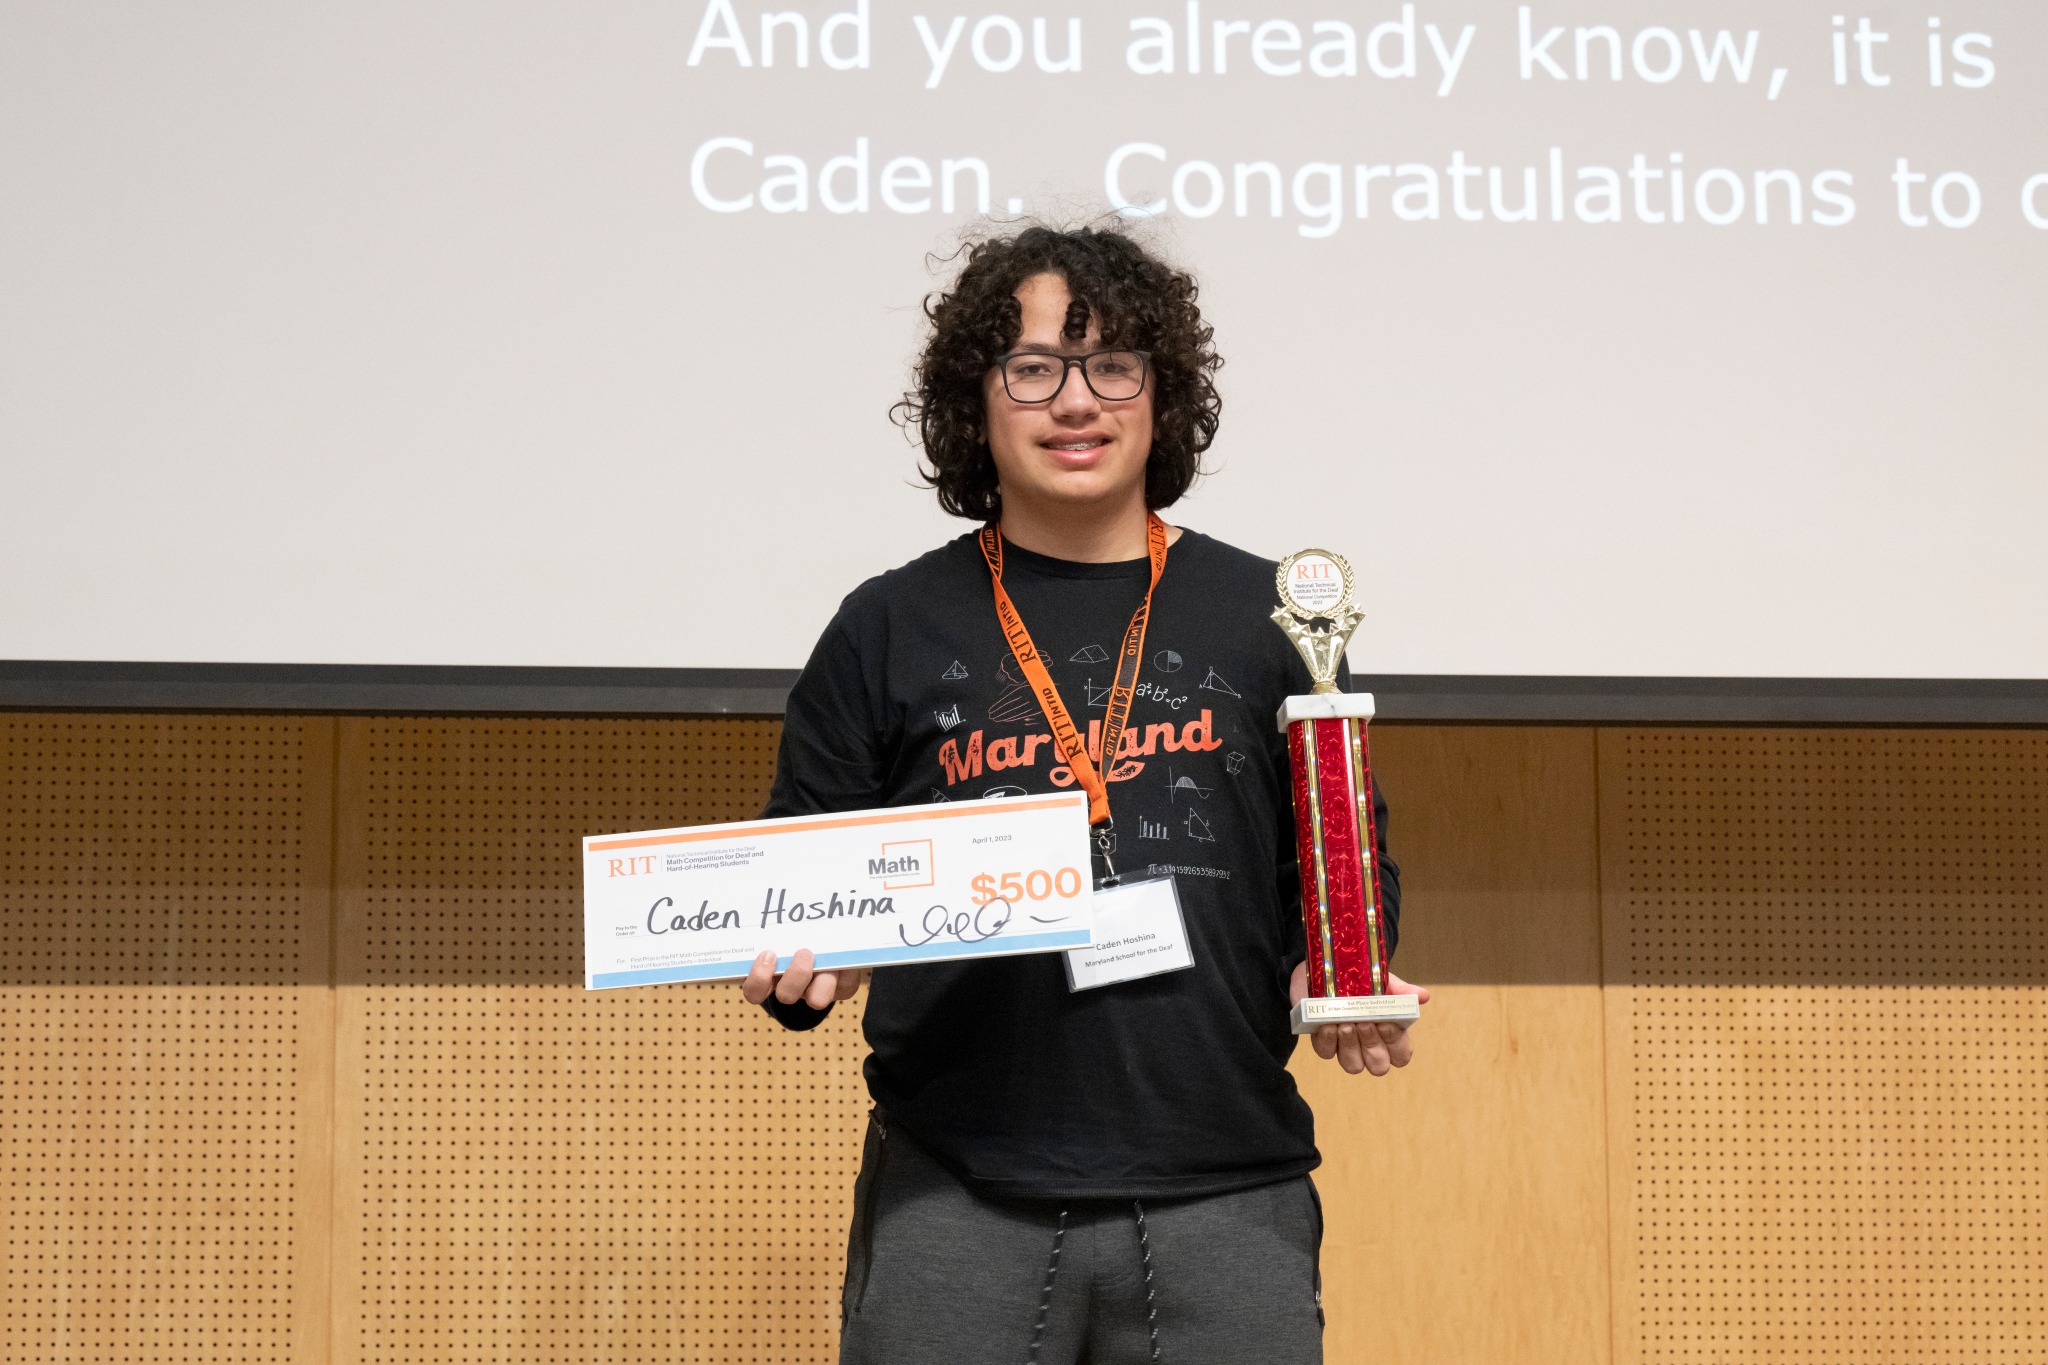 A middle school contestant from Maryland School for the Deaf stands facing the camera, holding a trophy and a check for $500. The contestant is wearing a black and orange shirt with an orange name tag.